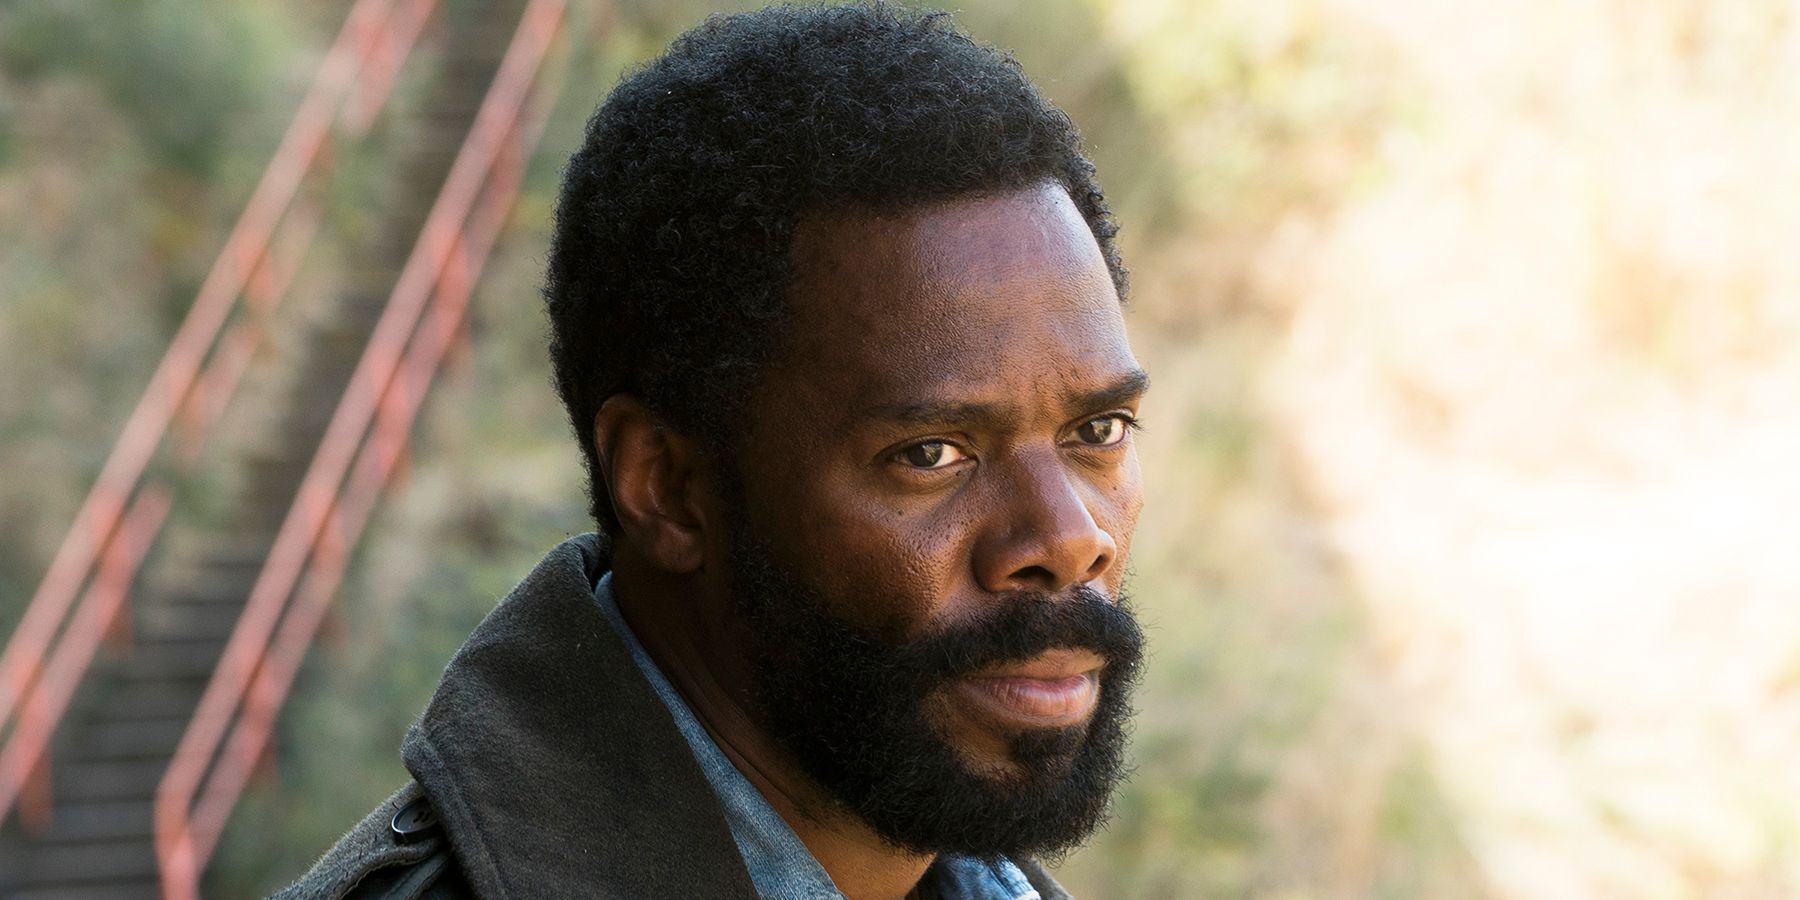 10 Fear The Walking Dead Characters Ranked By Likability